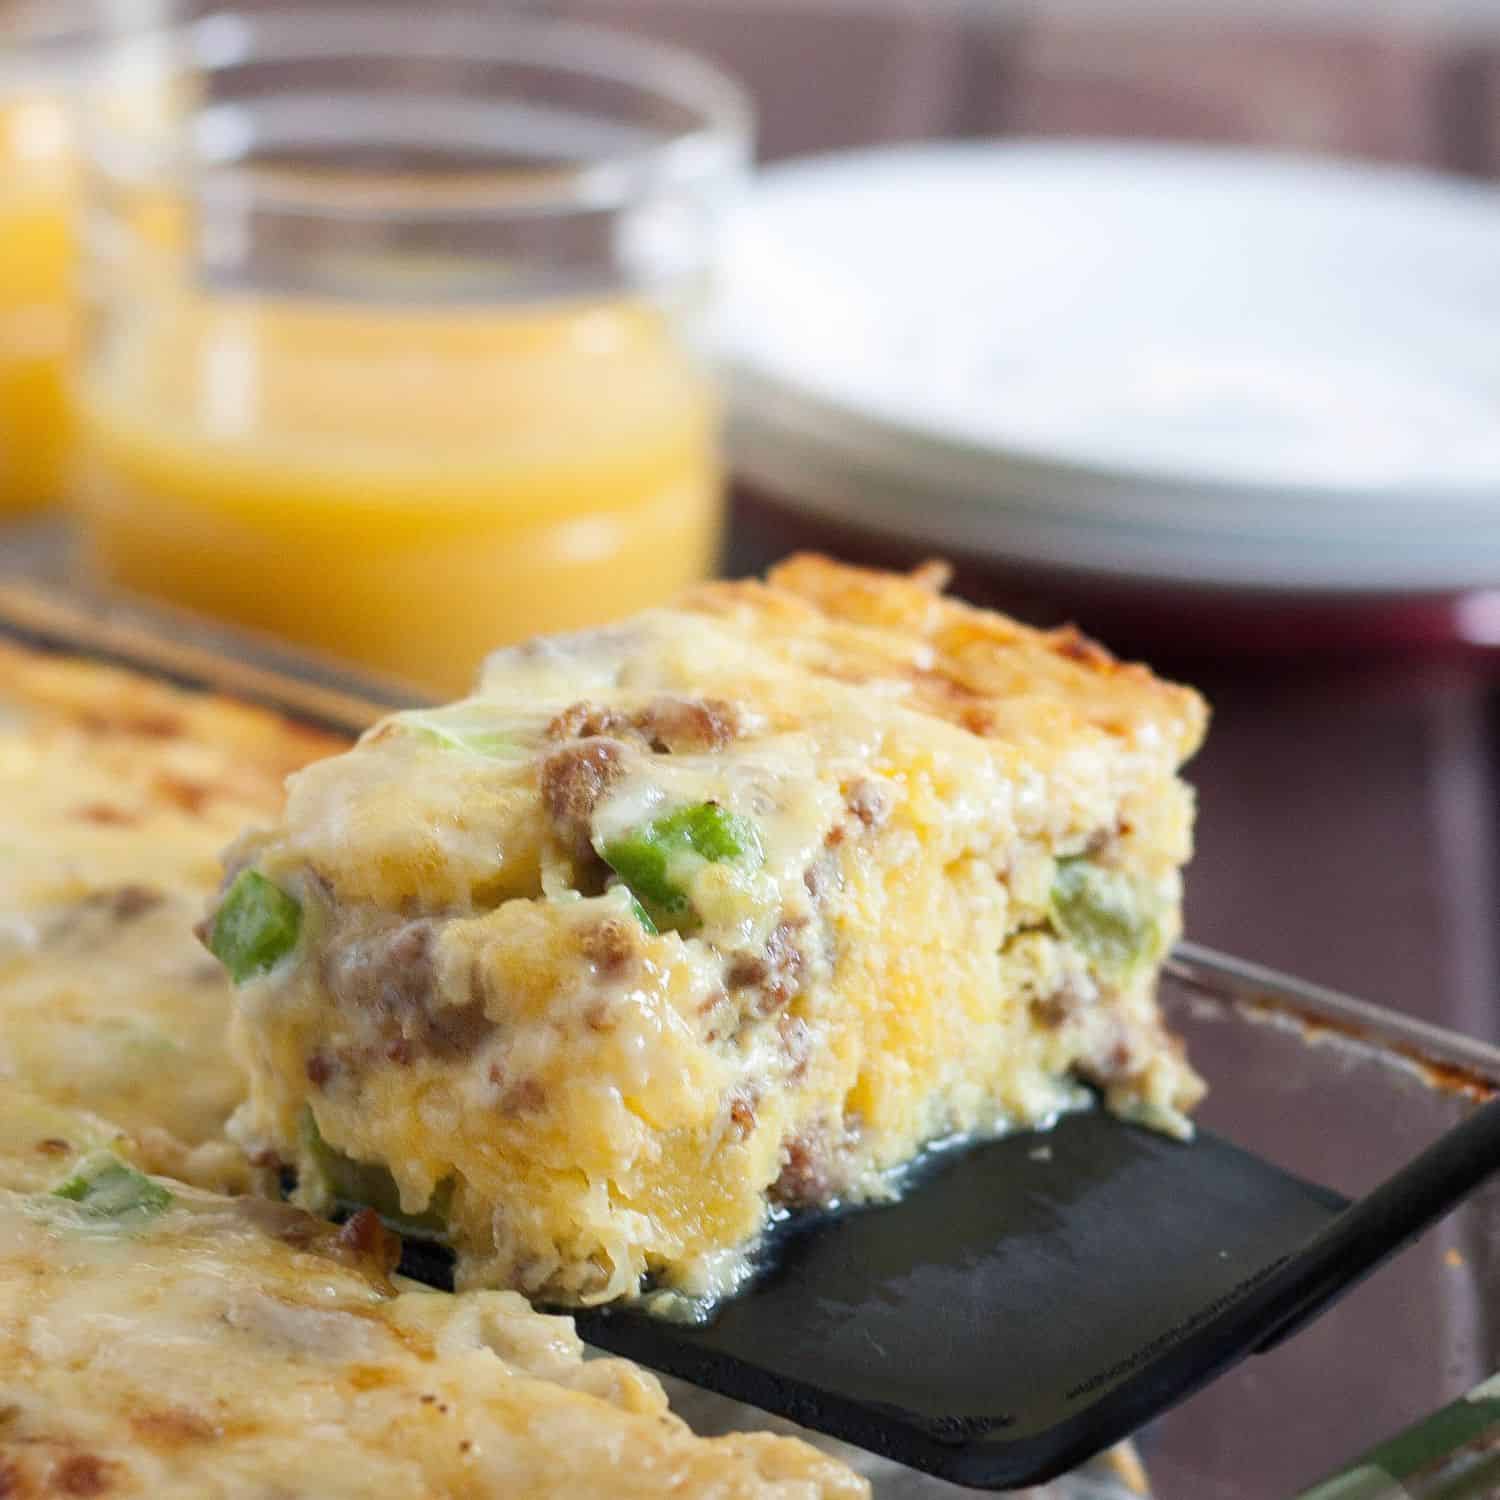 Actually HEALTHY *and* delicious, this low carb breakfast bake is perfect for weekend mornings. Make extra for easy, healthy weekday breakfasts because it reheats really well!